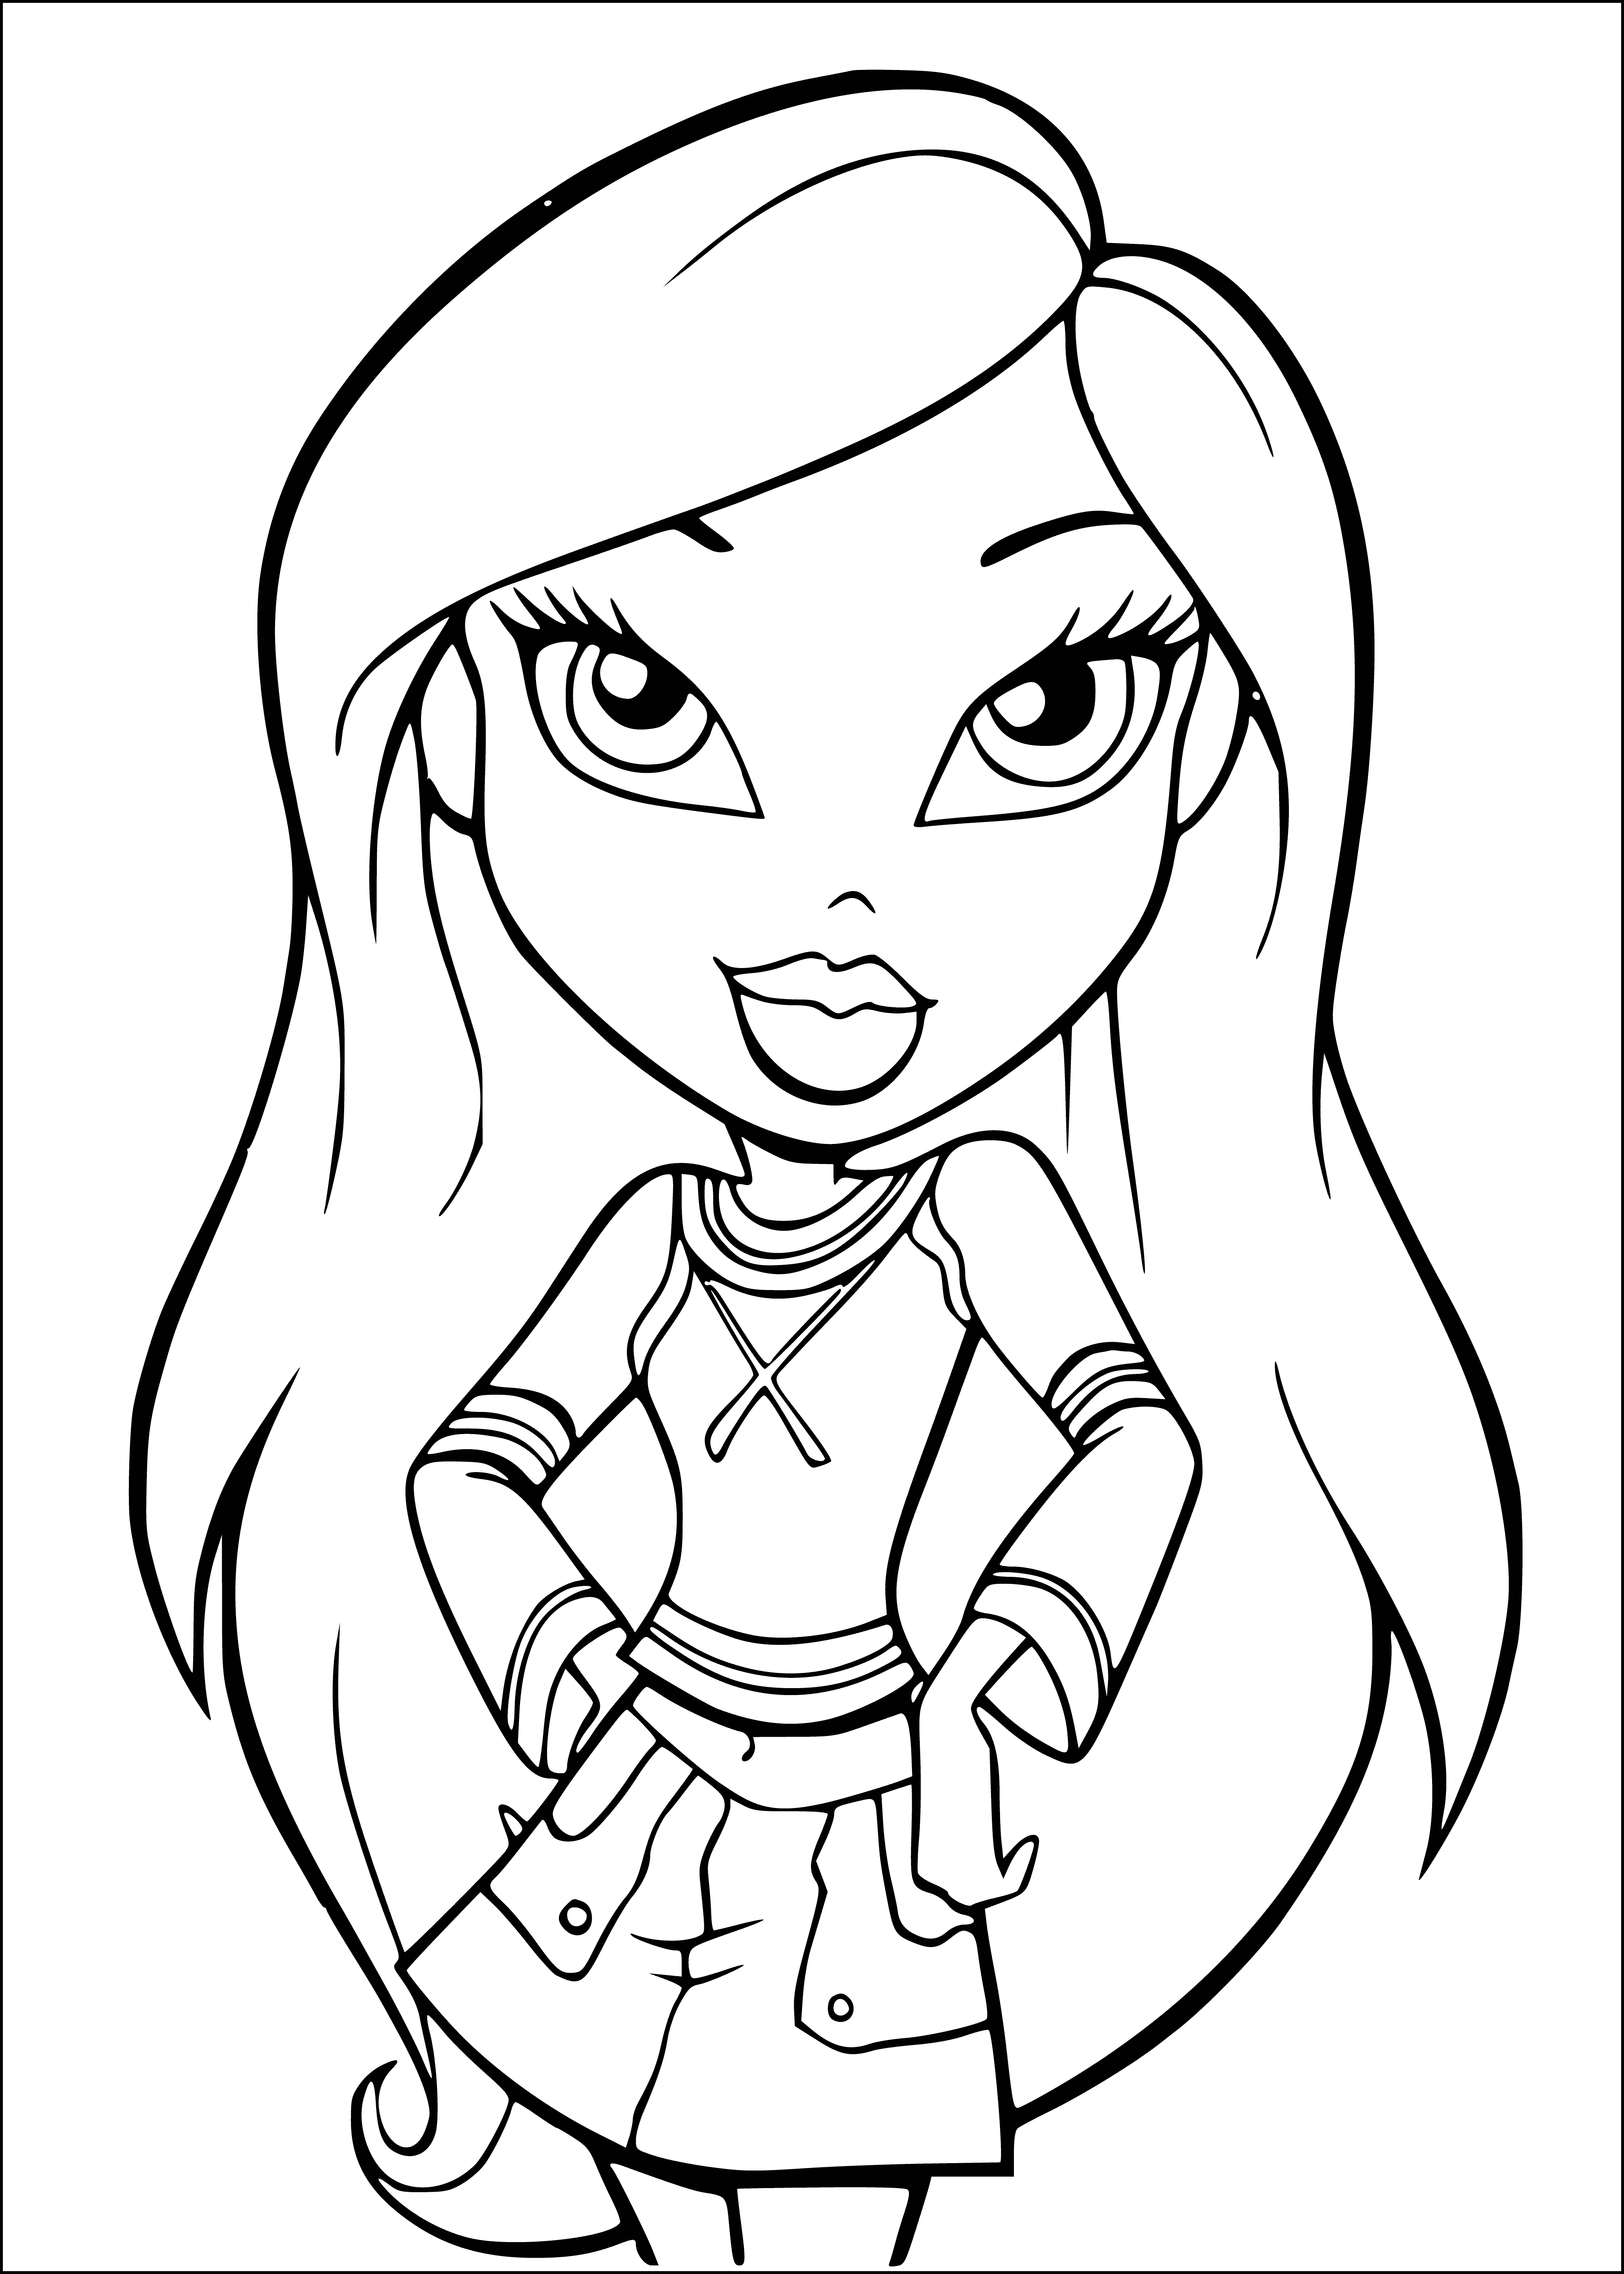 coloring page: Four trendy young girls, wearing stylish clothes and shopping bags, standing in front of a store. #Bratz